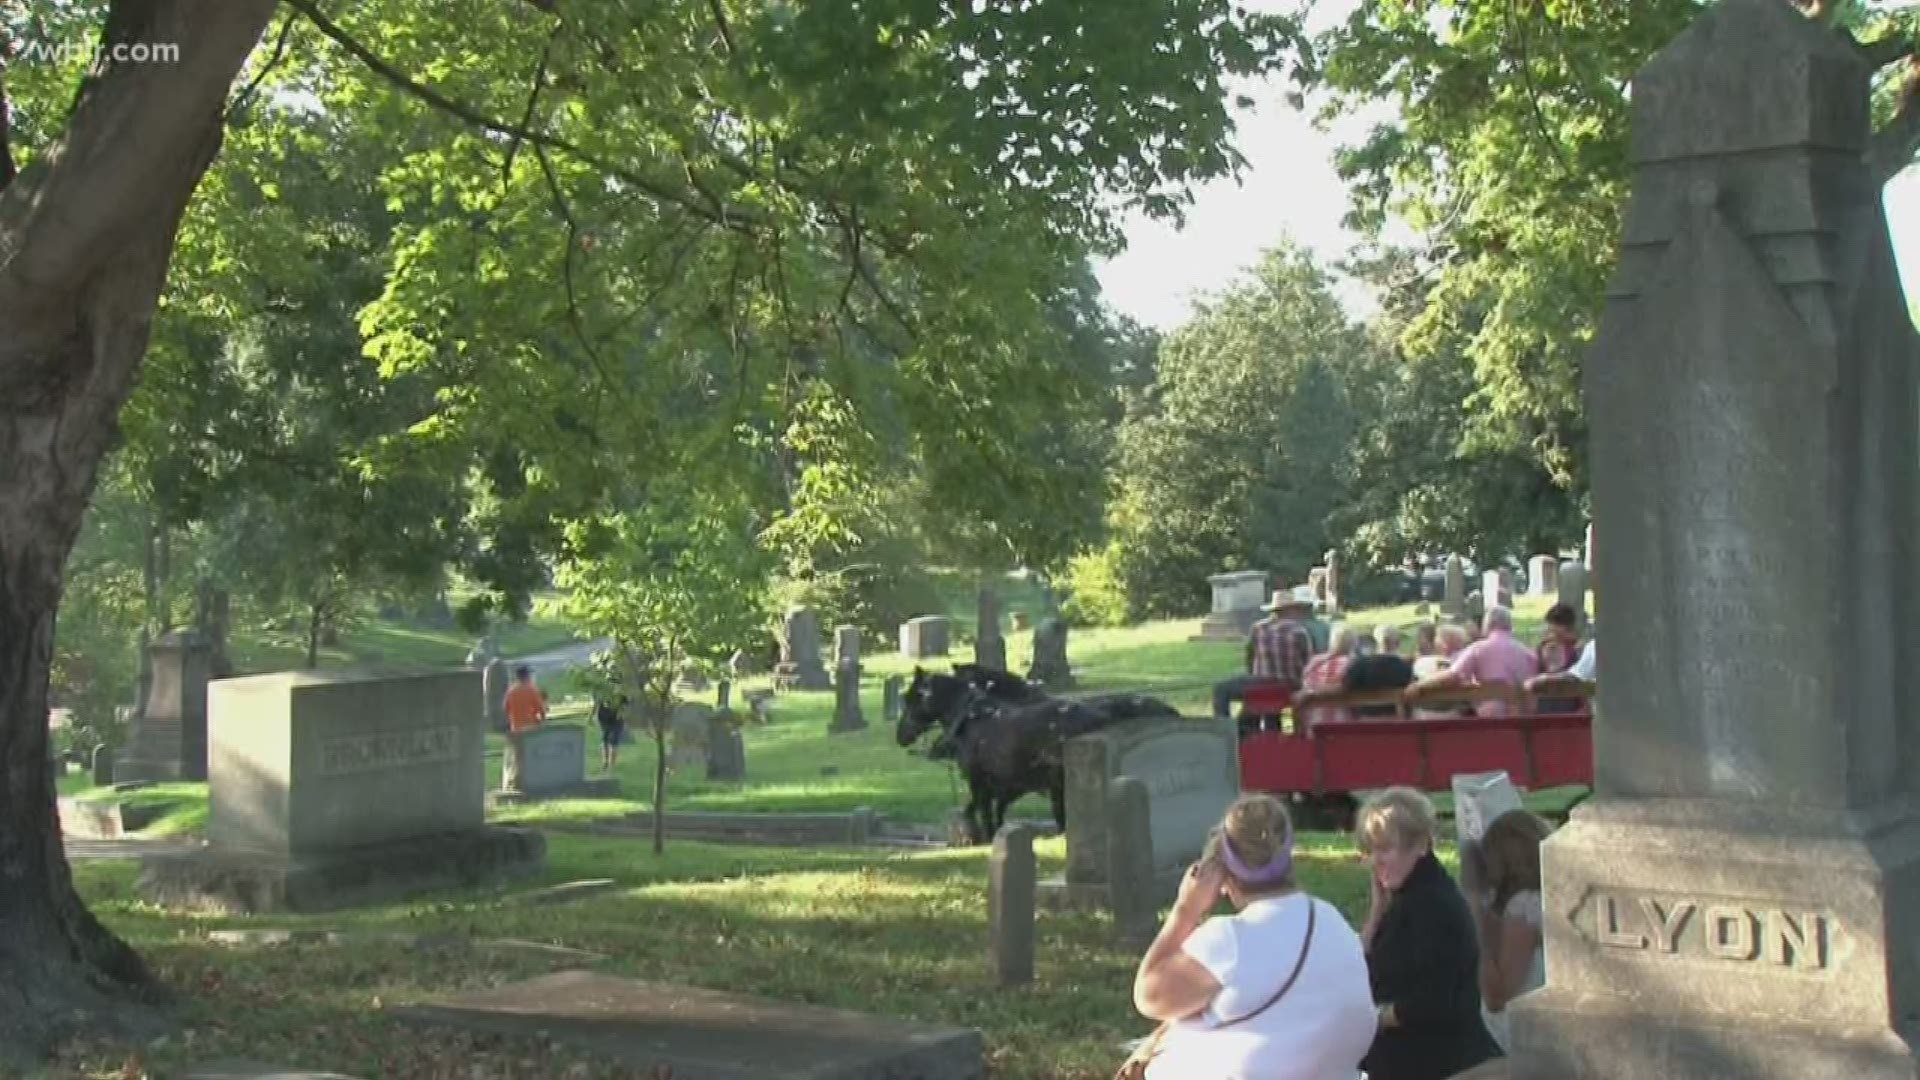 The Old Gray Cemetery will host its 19th annual lantern and carriage tour on September 29.